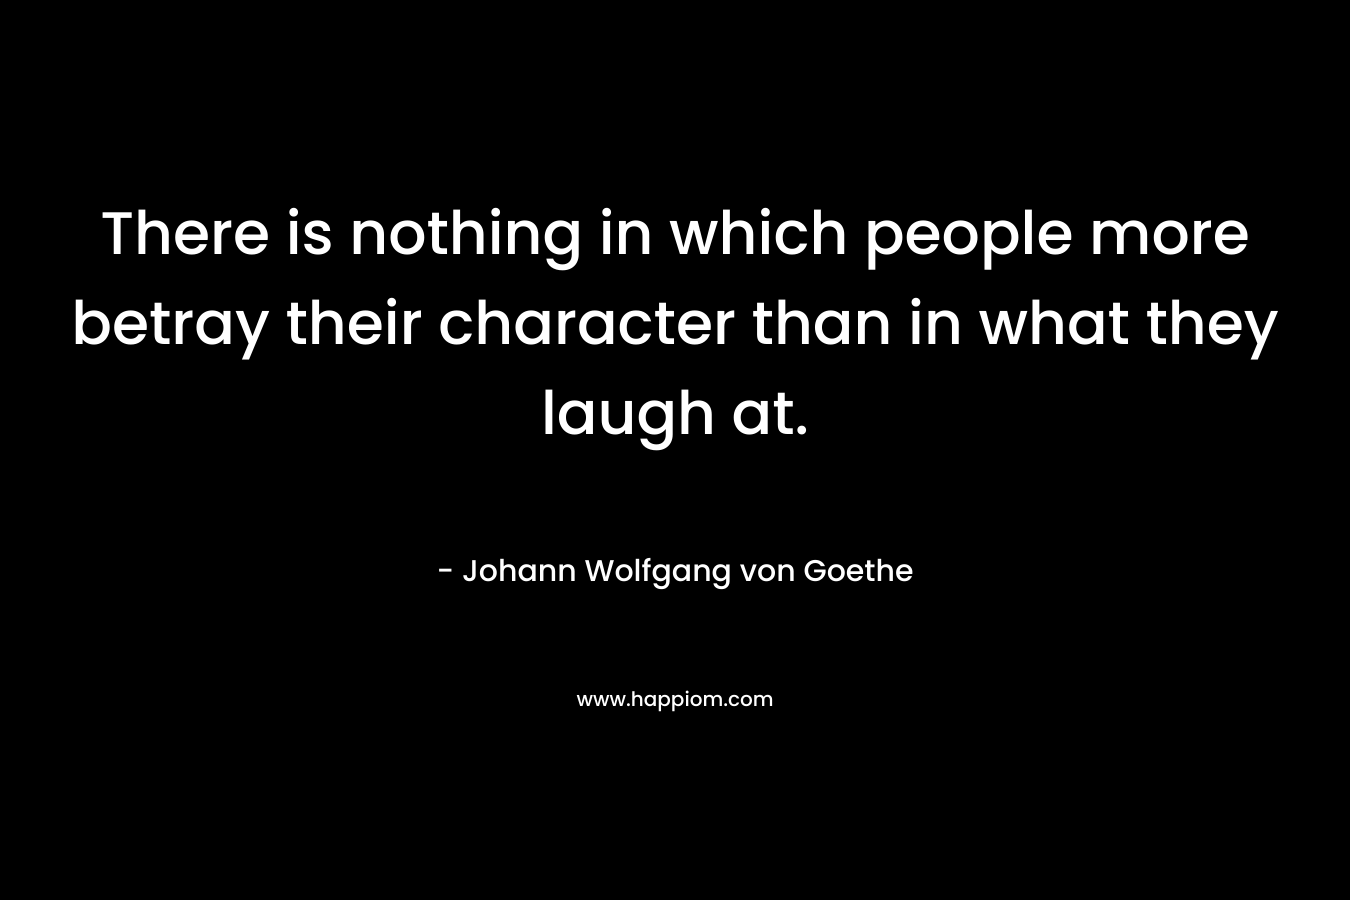 There is nothing in which people more betray their character than in what they laugh at.